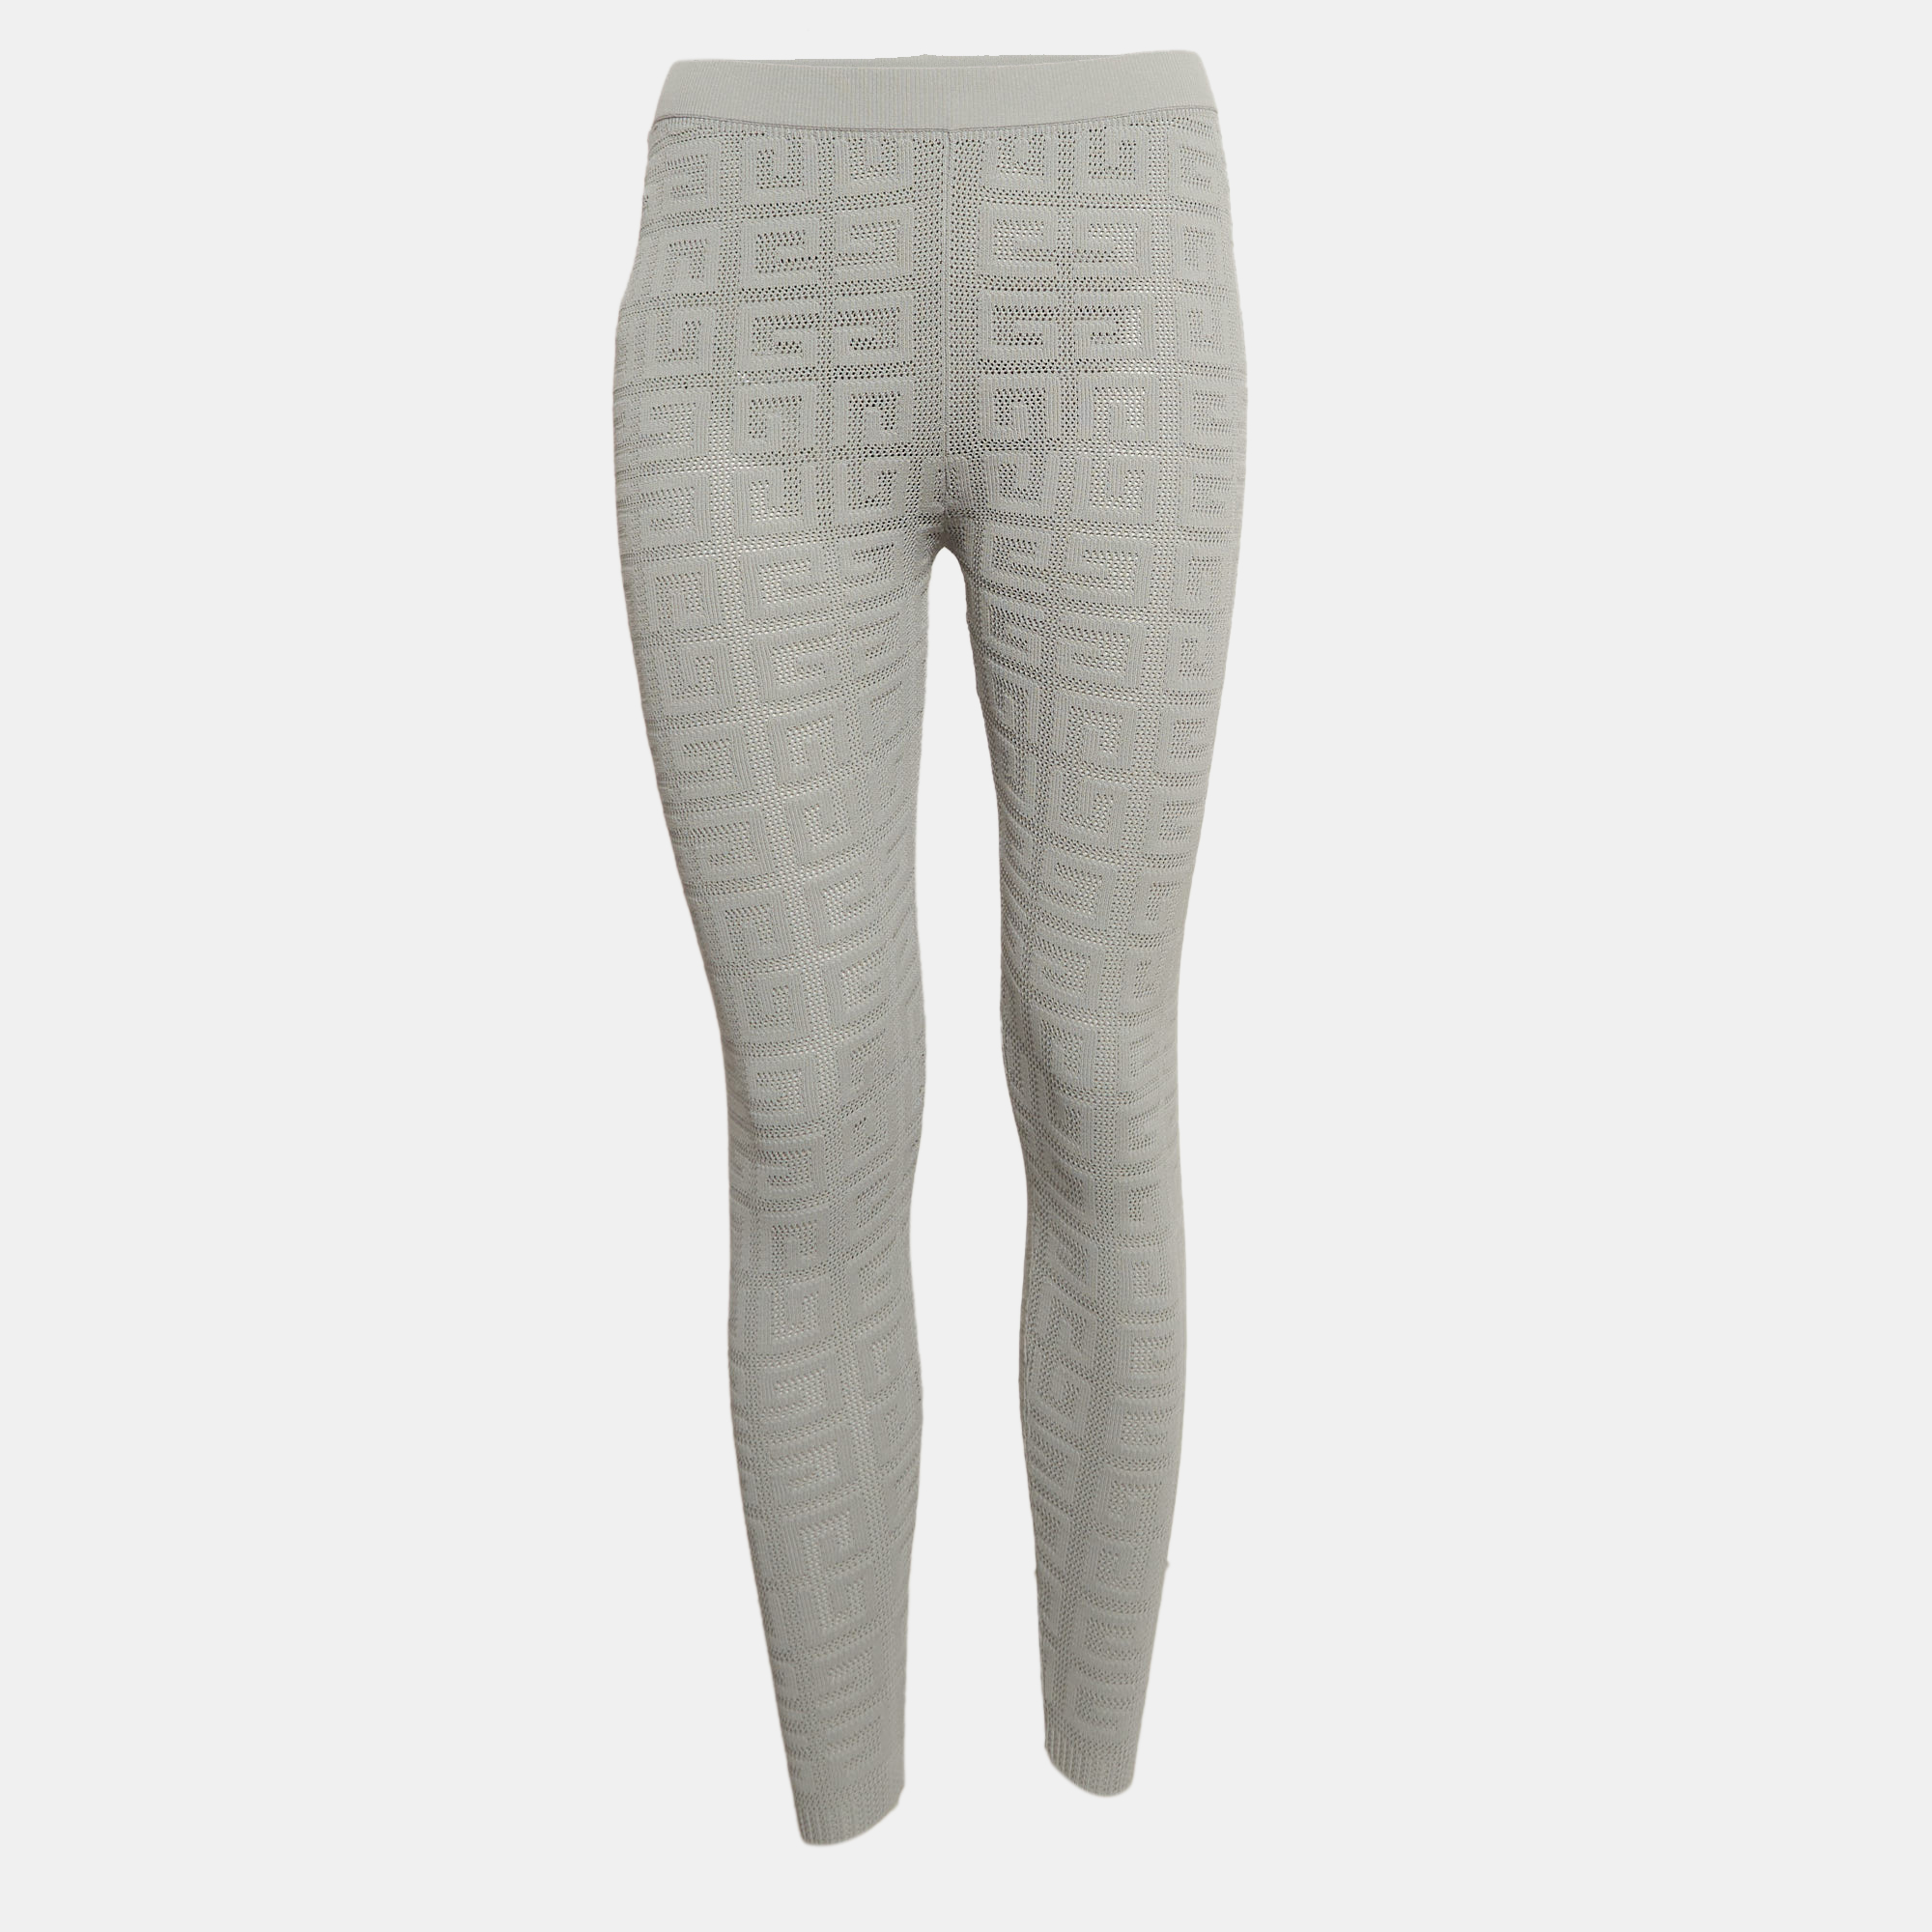 

Givenchy Grey Patterned Knit Leggings S